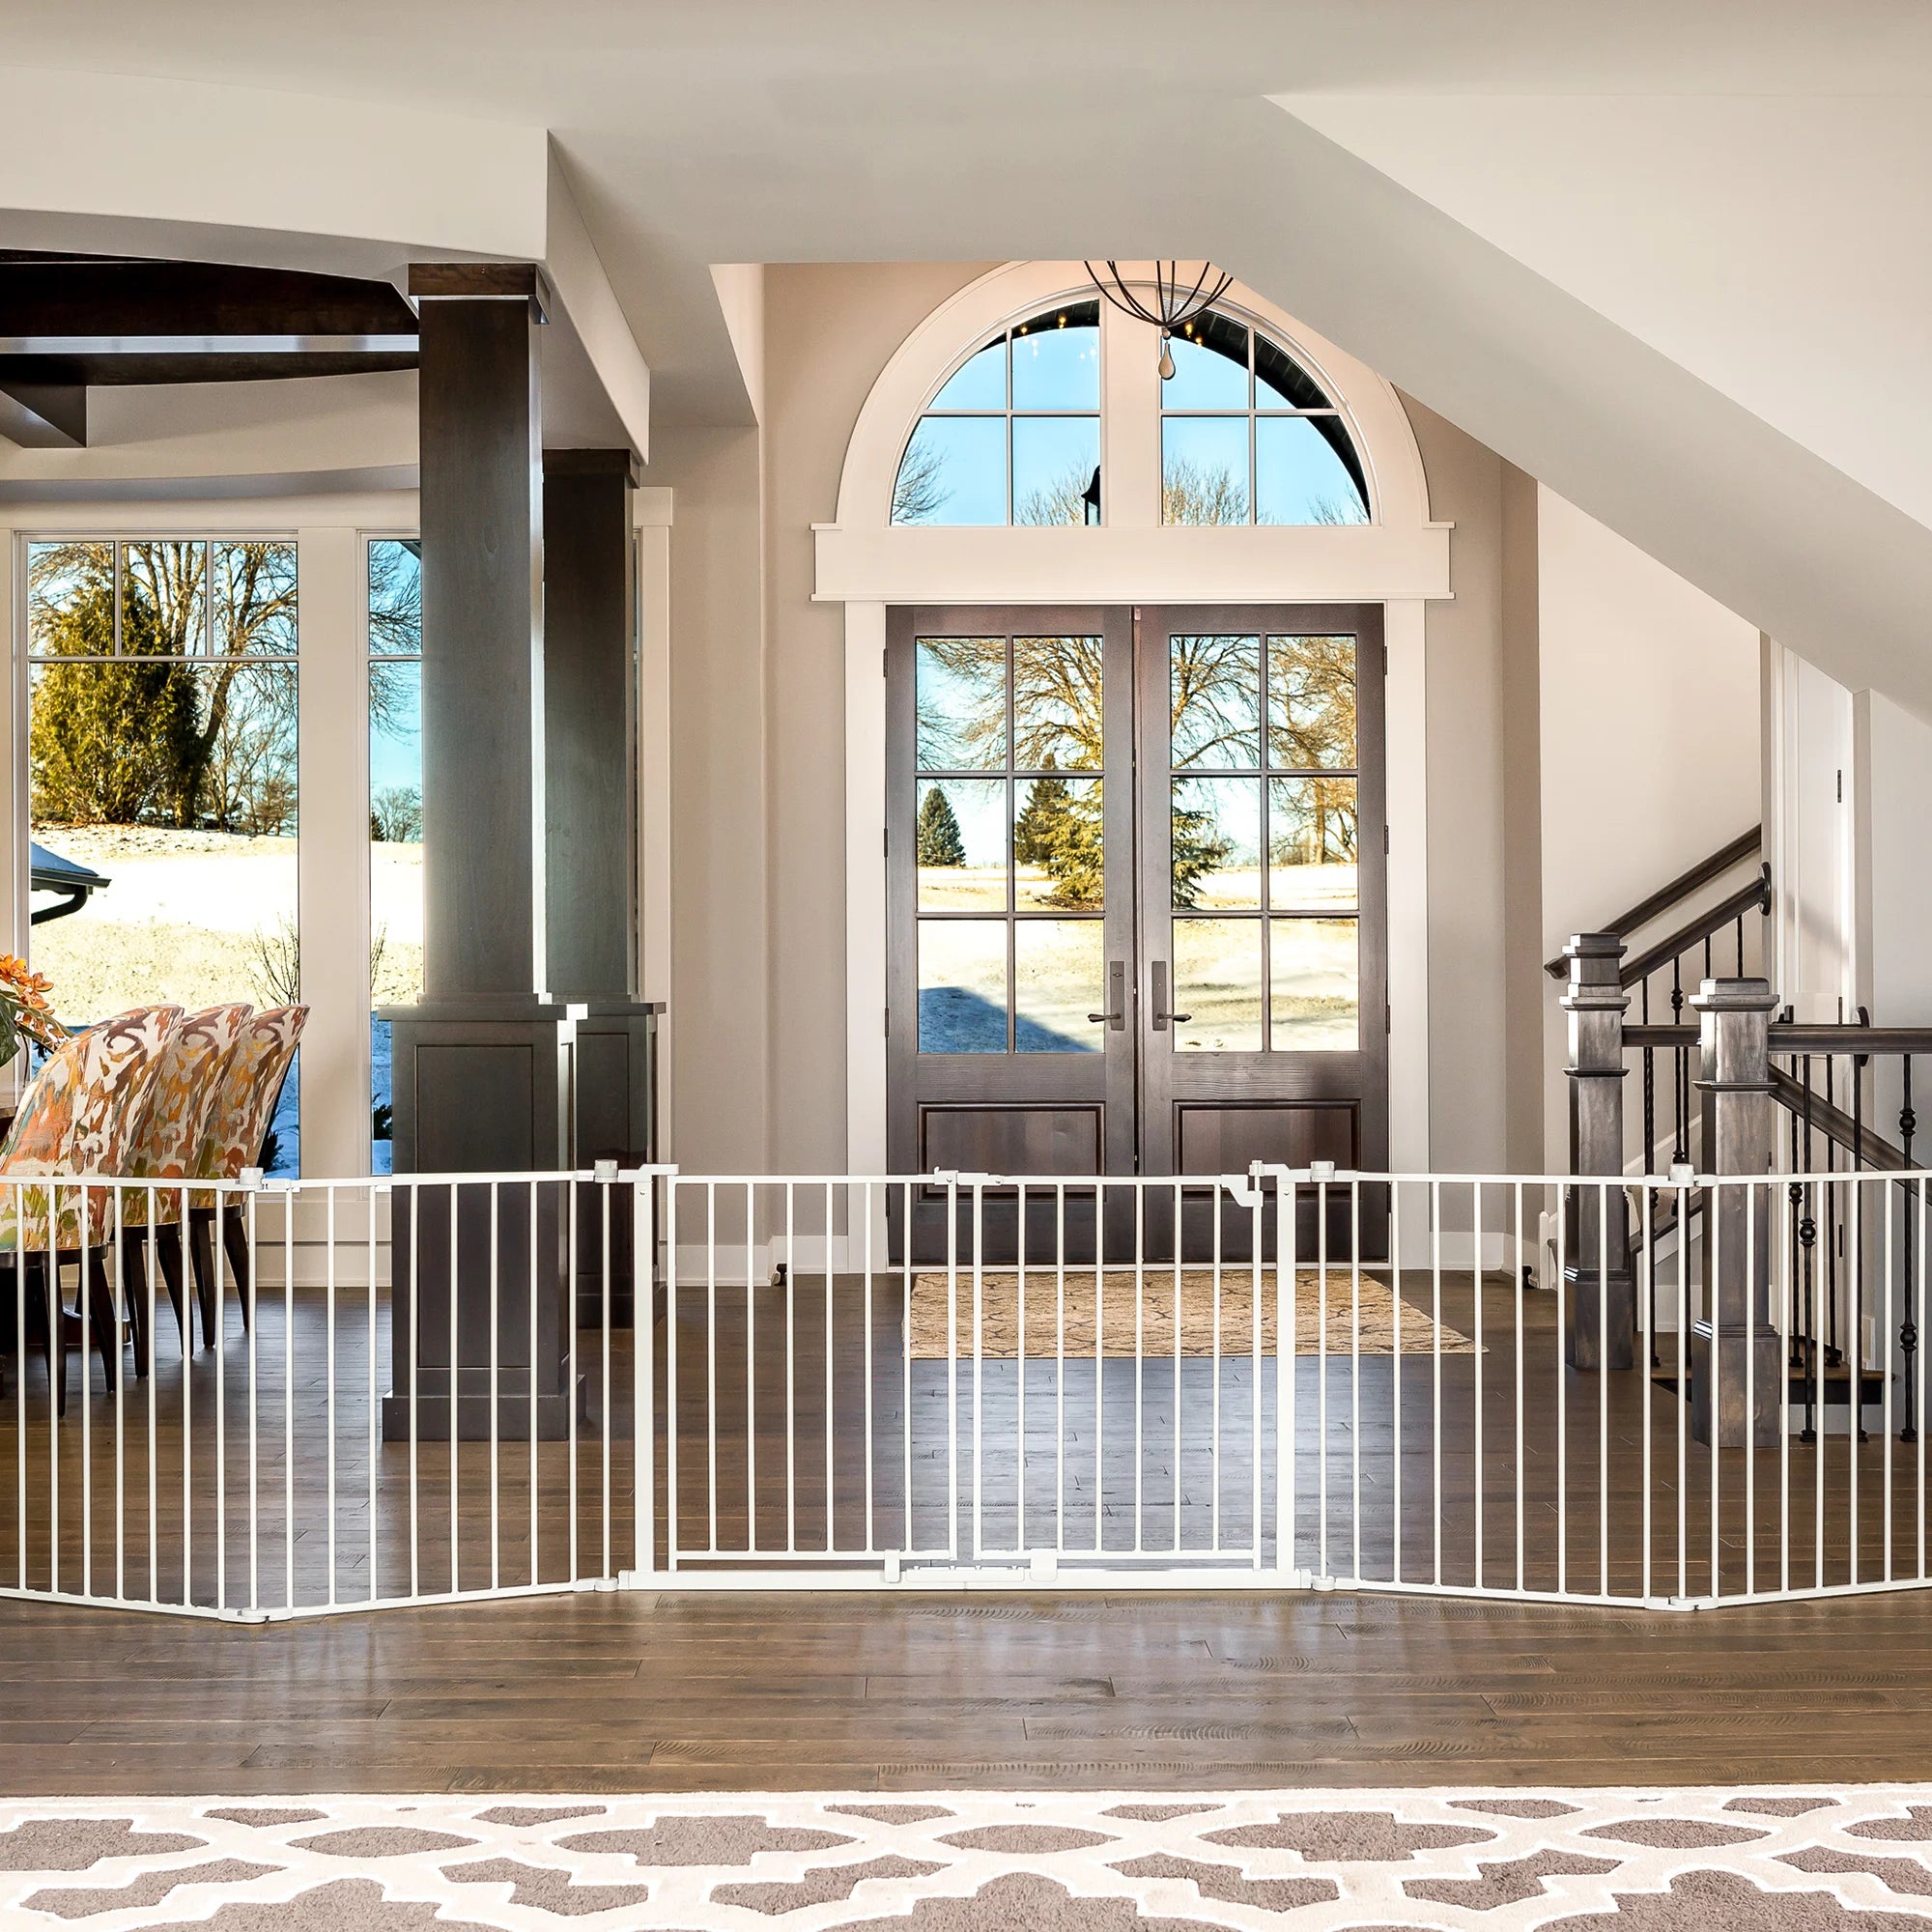 The Double Door Super Wide Pet Gate and Pet Yard with its two doors closed.